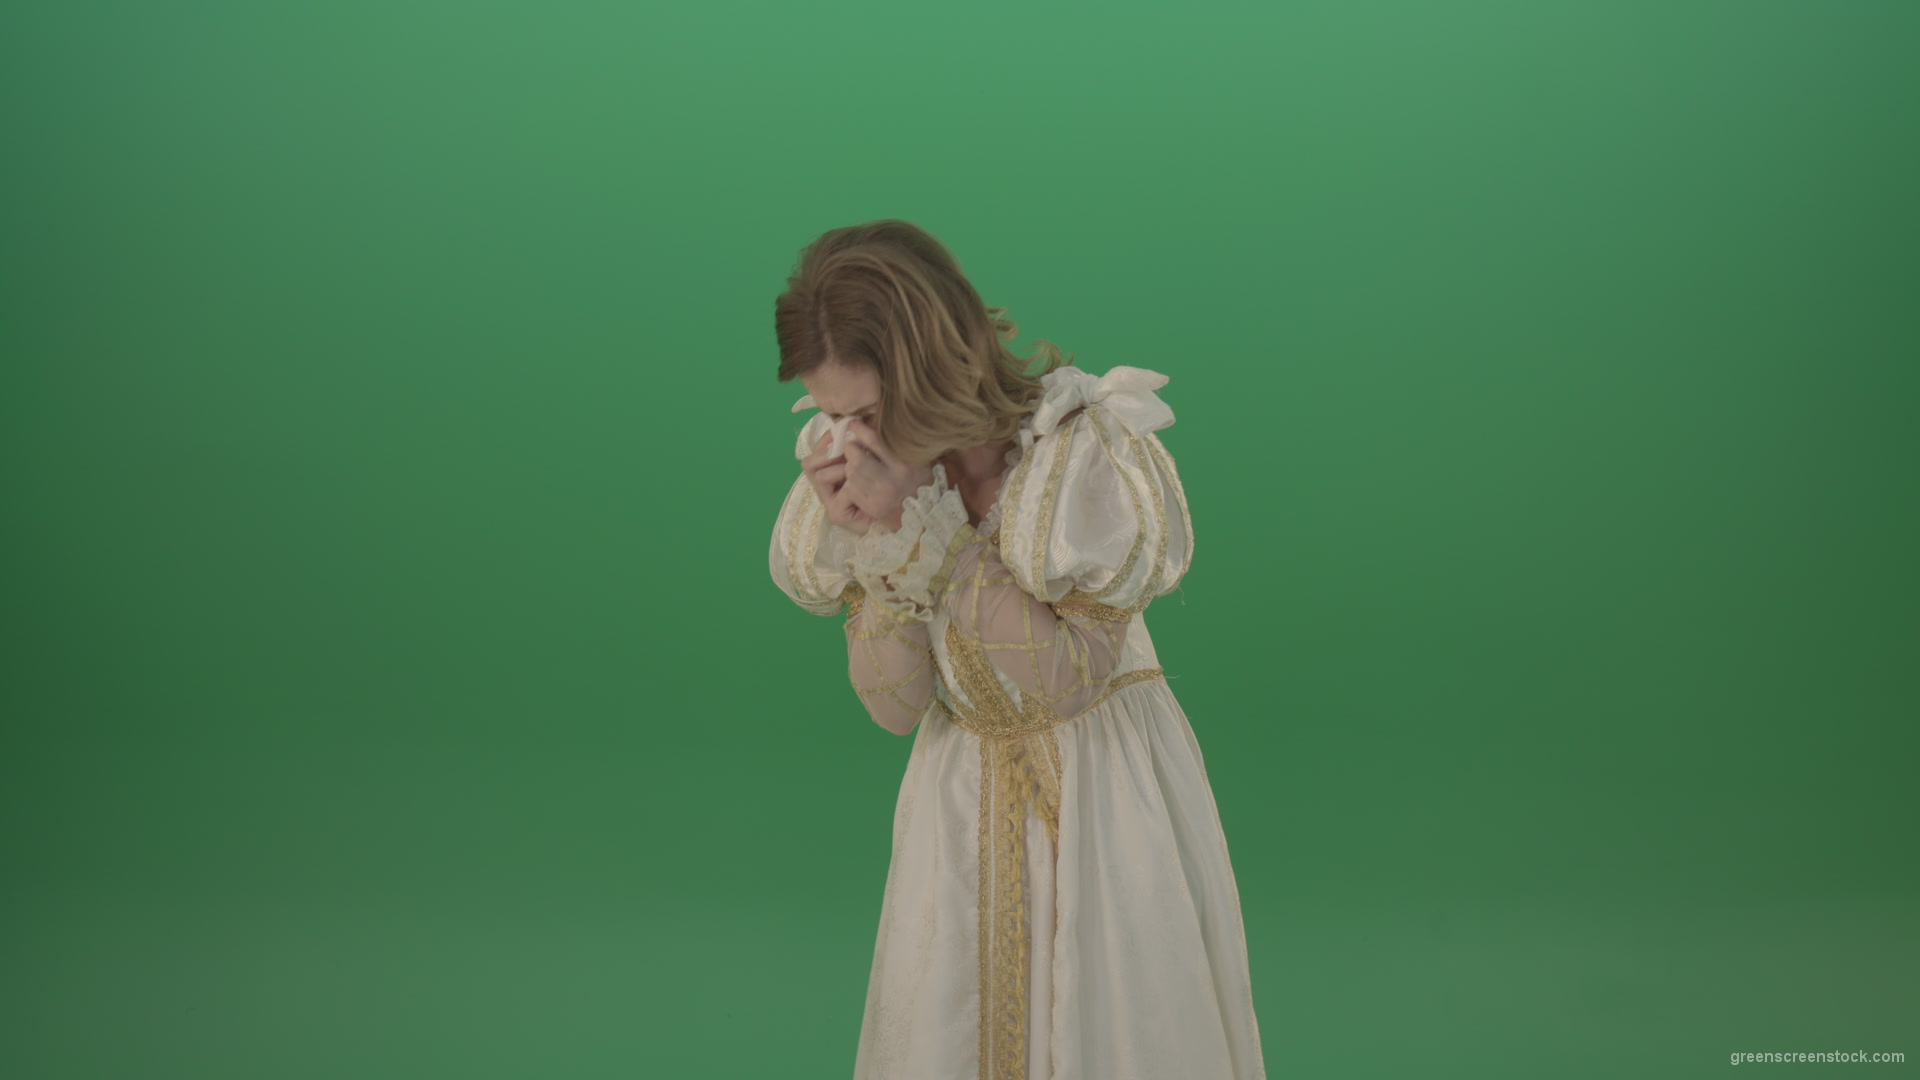 Sick-girl-coughs-and-shows-symptoms-of-the-disease-isolated-on-green-background_007 Green Screen Stock